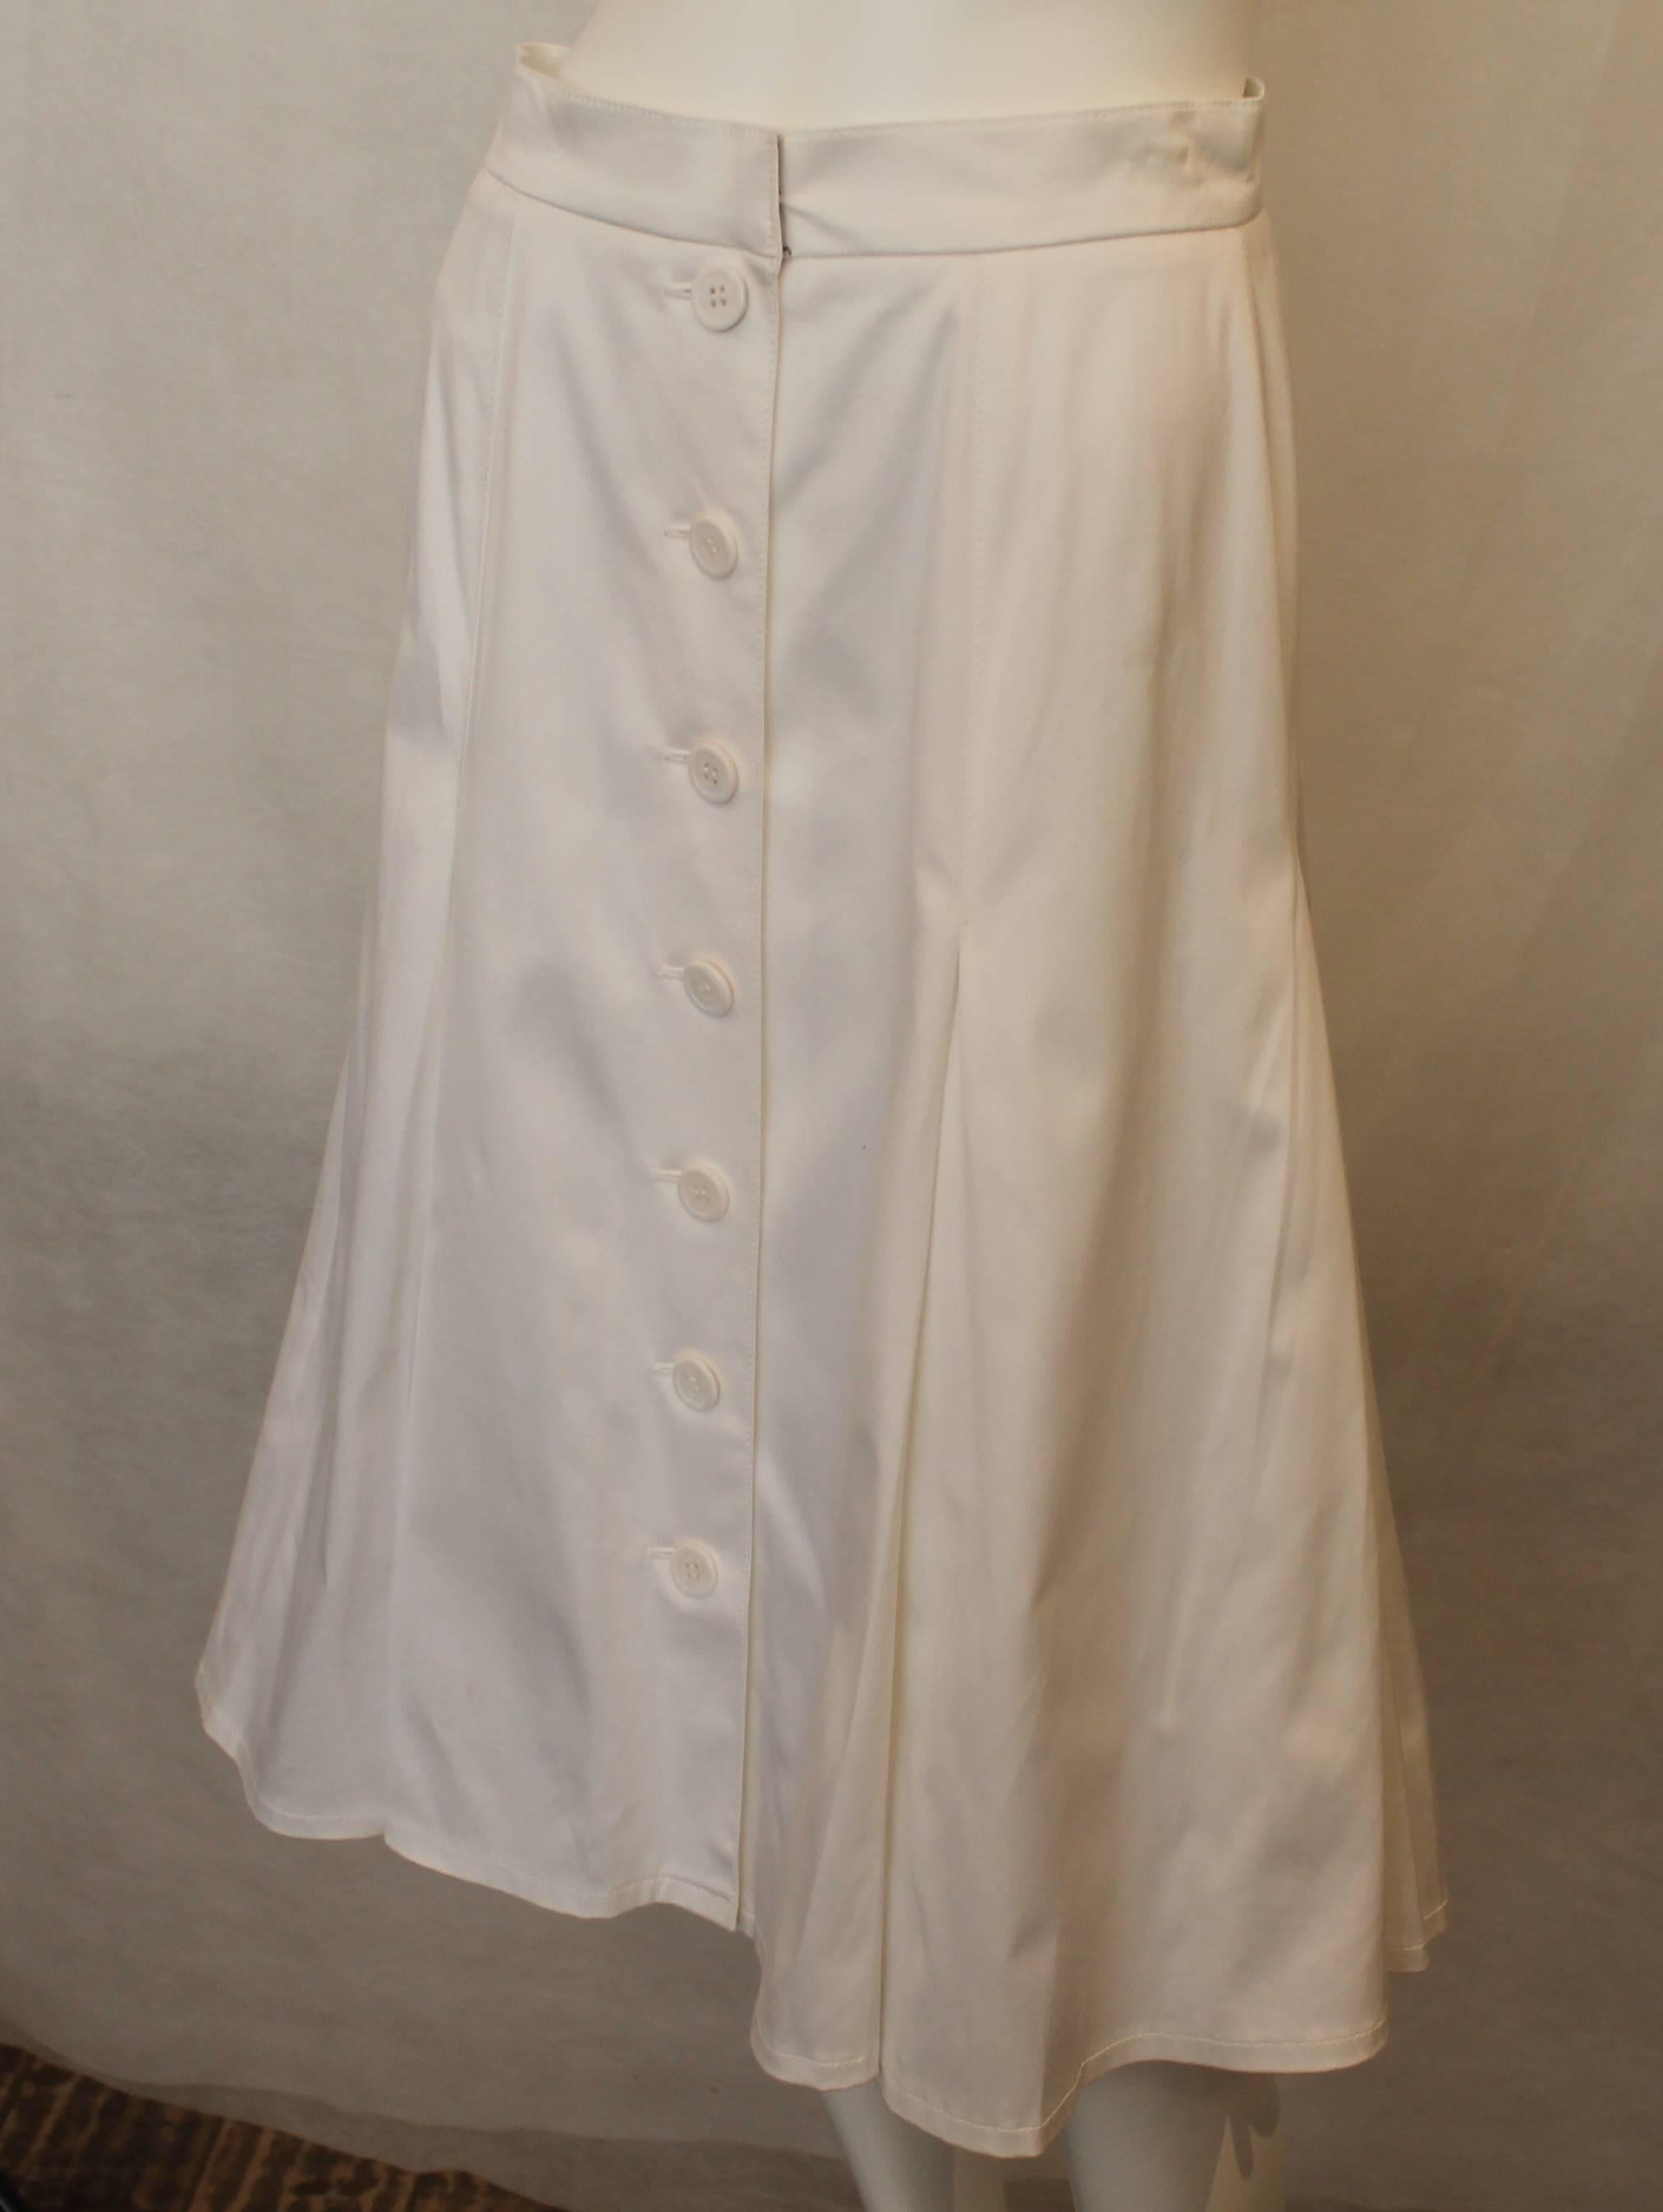 Oscar de la Renta White Cotton Tea Length Skirt with High Pleats and Buttons - 6. This  skirt is tea length and has high pleats. Buttons go down the entire front. It is in good condition with some stains near the front.

Measurements
Waist: